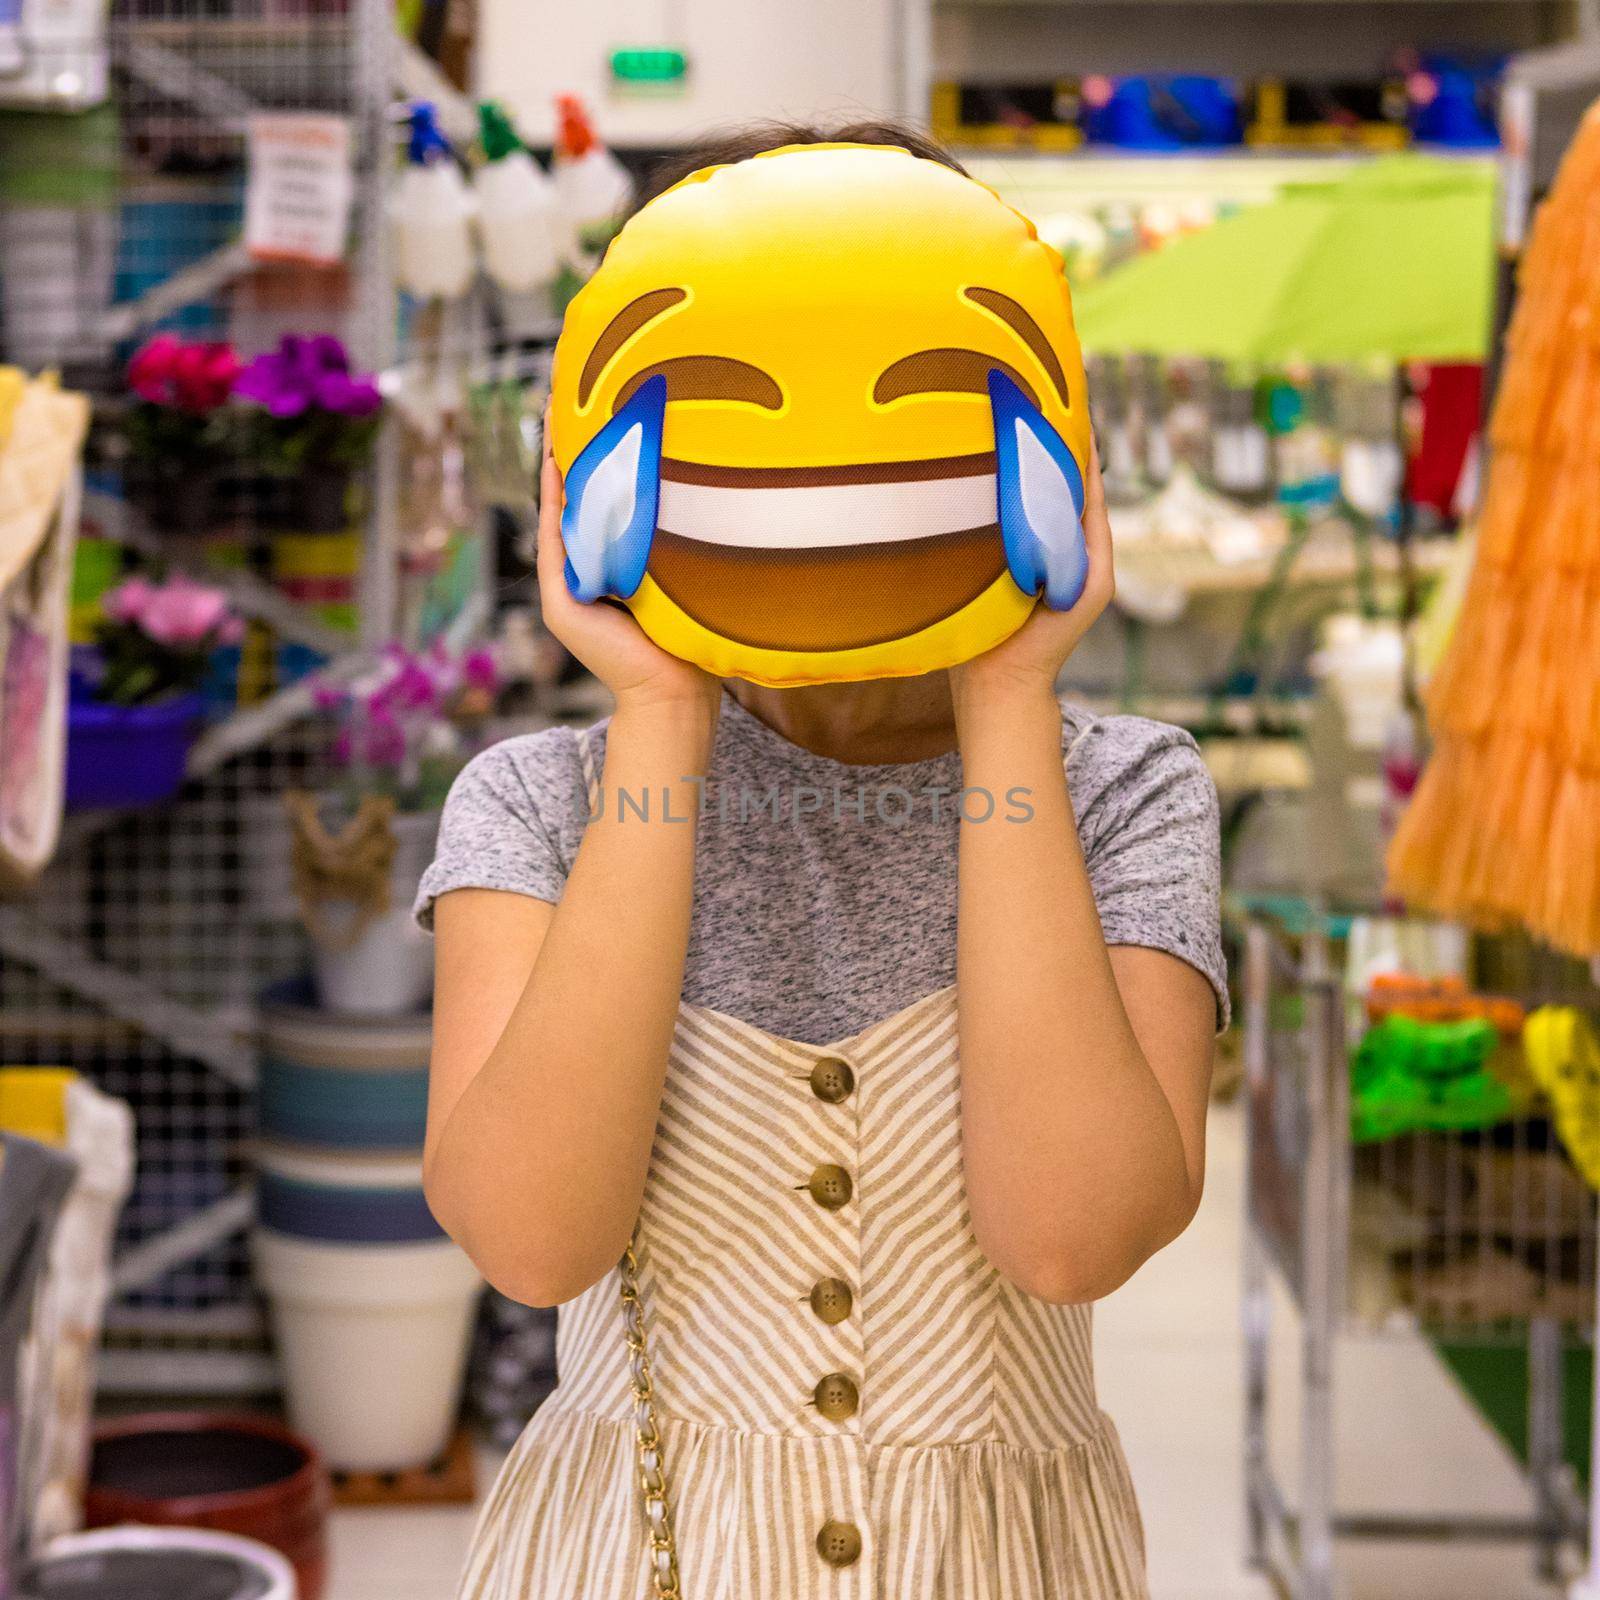 Woman holding a laugh emoji pillow by ferhad